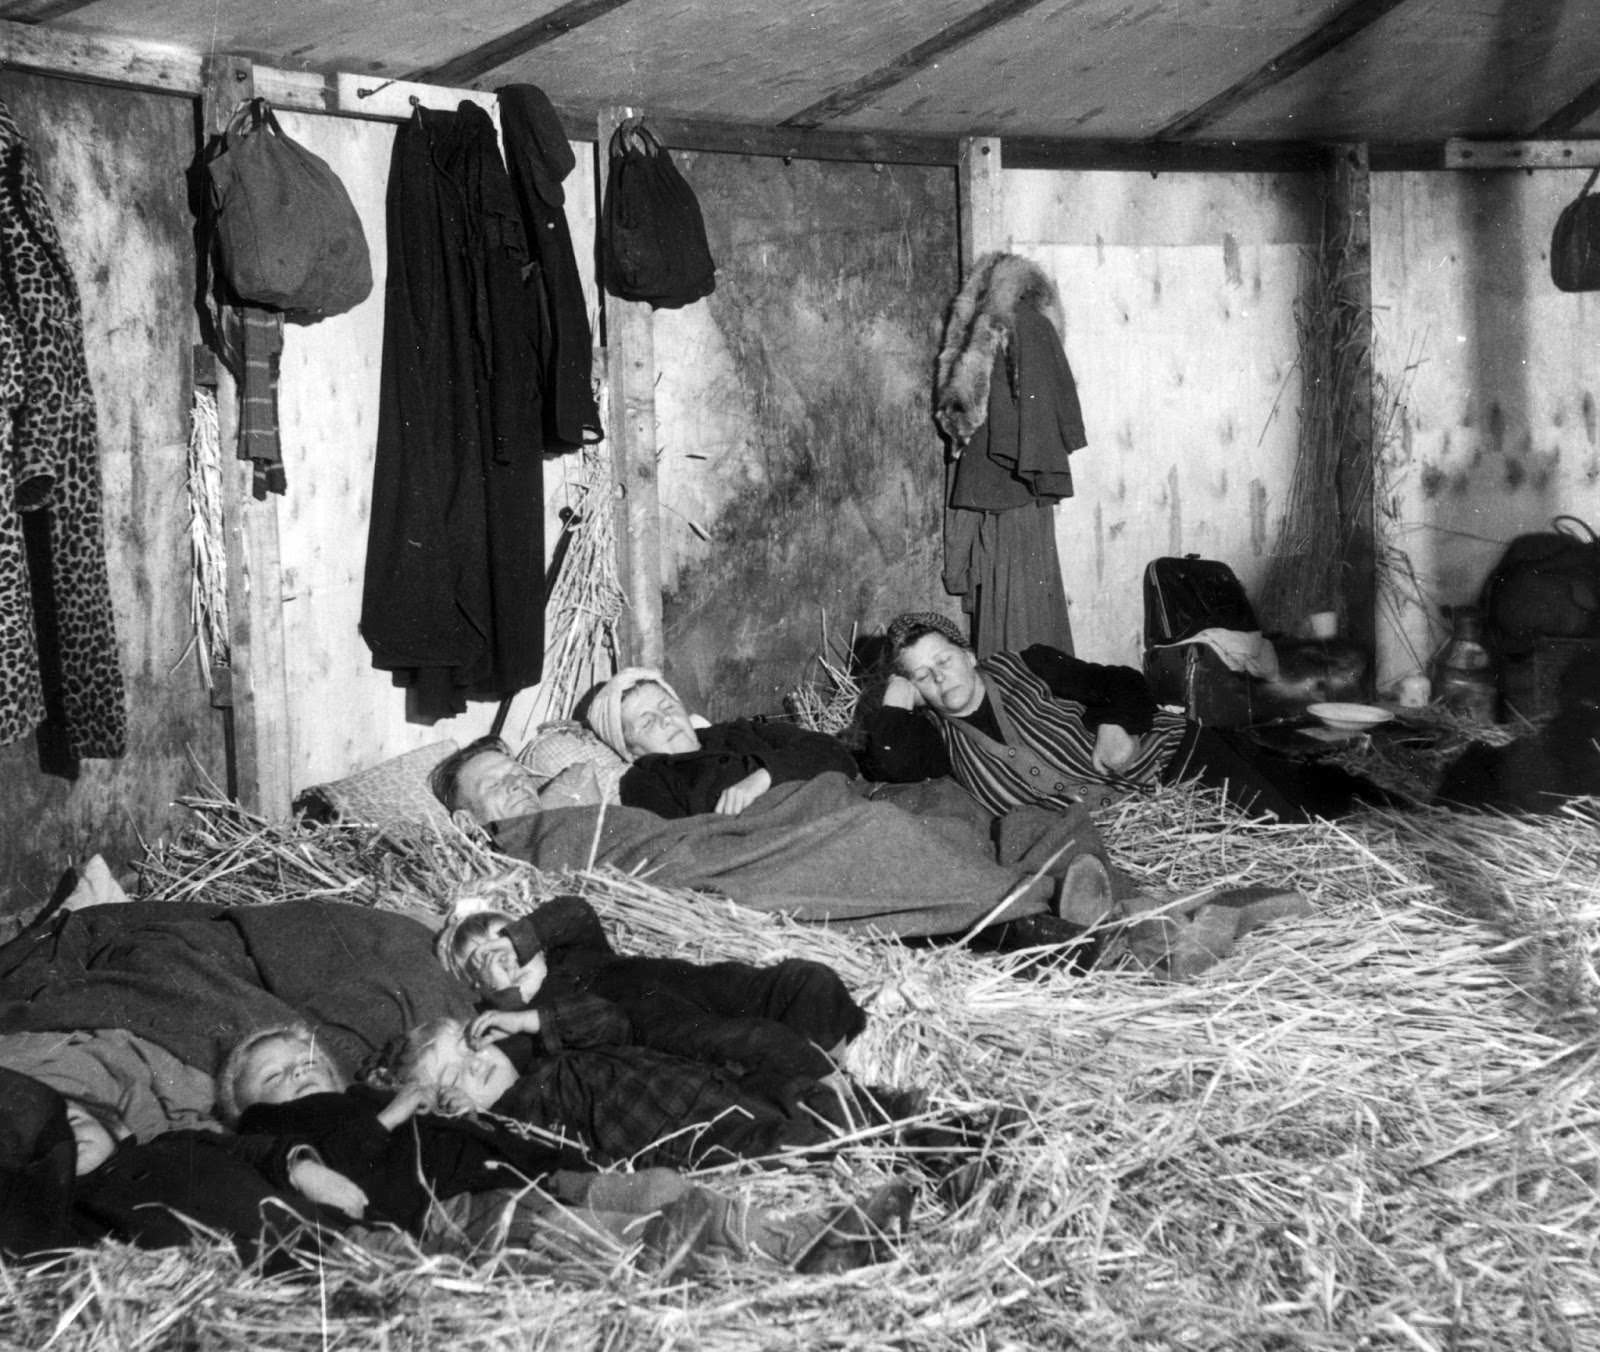 German refugees fleeing from the Russian zone in the first few weeks after the end of World War II in Europe, seen on Oct. 25, 1945. They are sleeping on straw in a makeshift transit camp at Uelzen in the British zone of Germany.